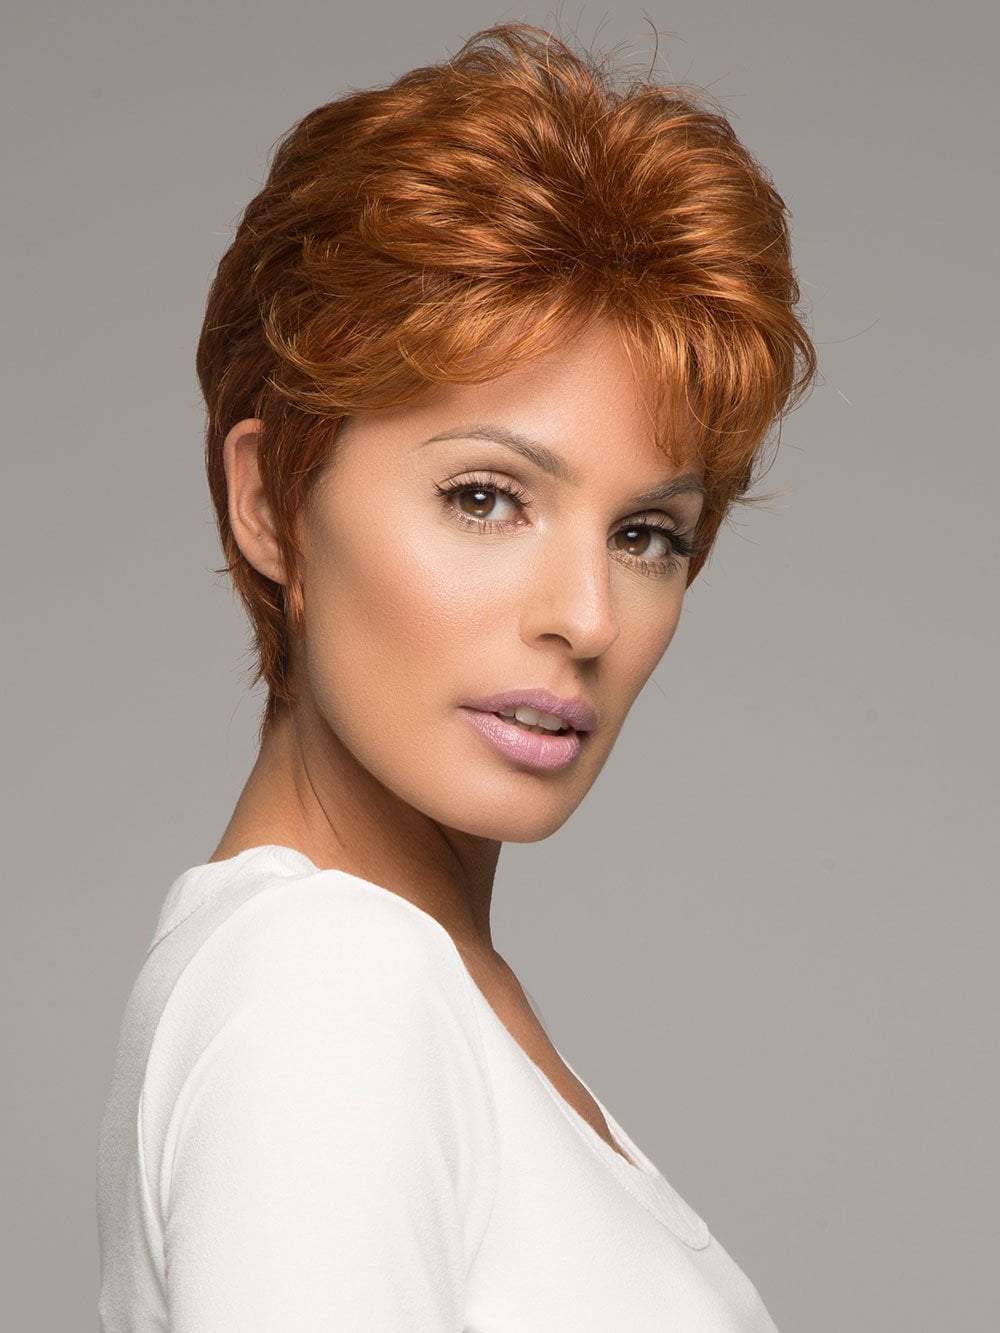 WHISPER by RAQUEL WELCH in R28S GLAZED FIRE | Fiery Red with Bright Red Highlight on Top